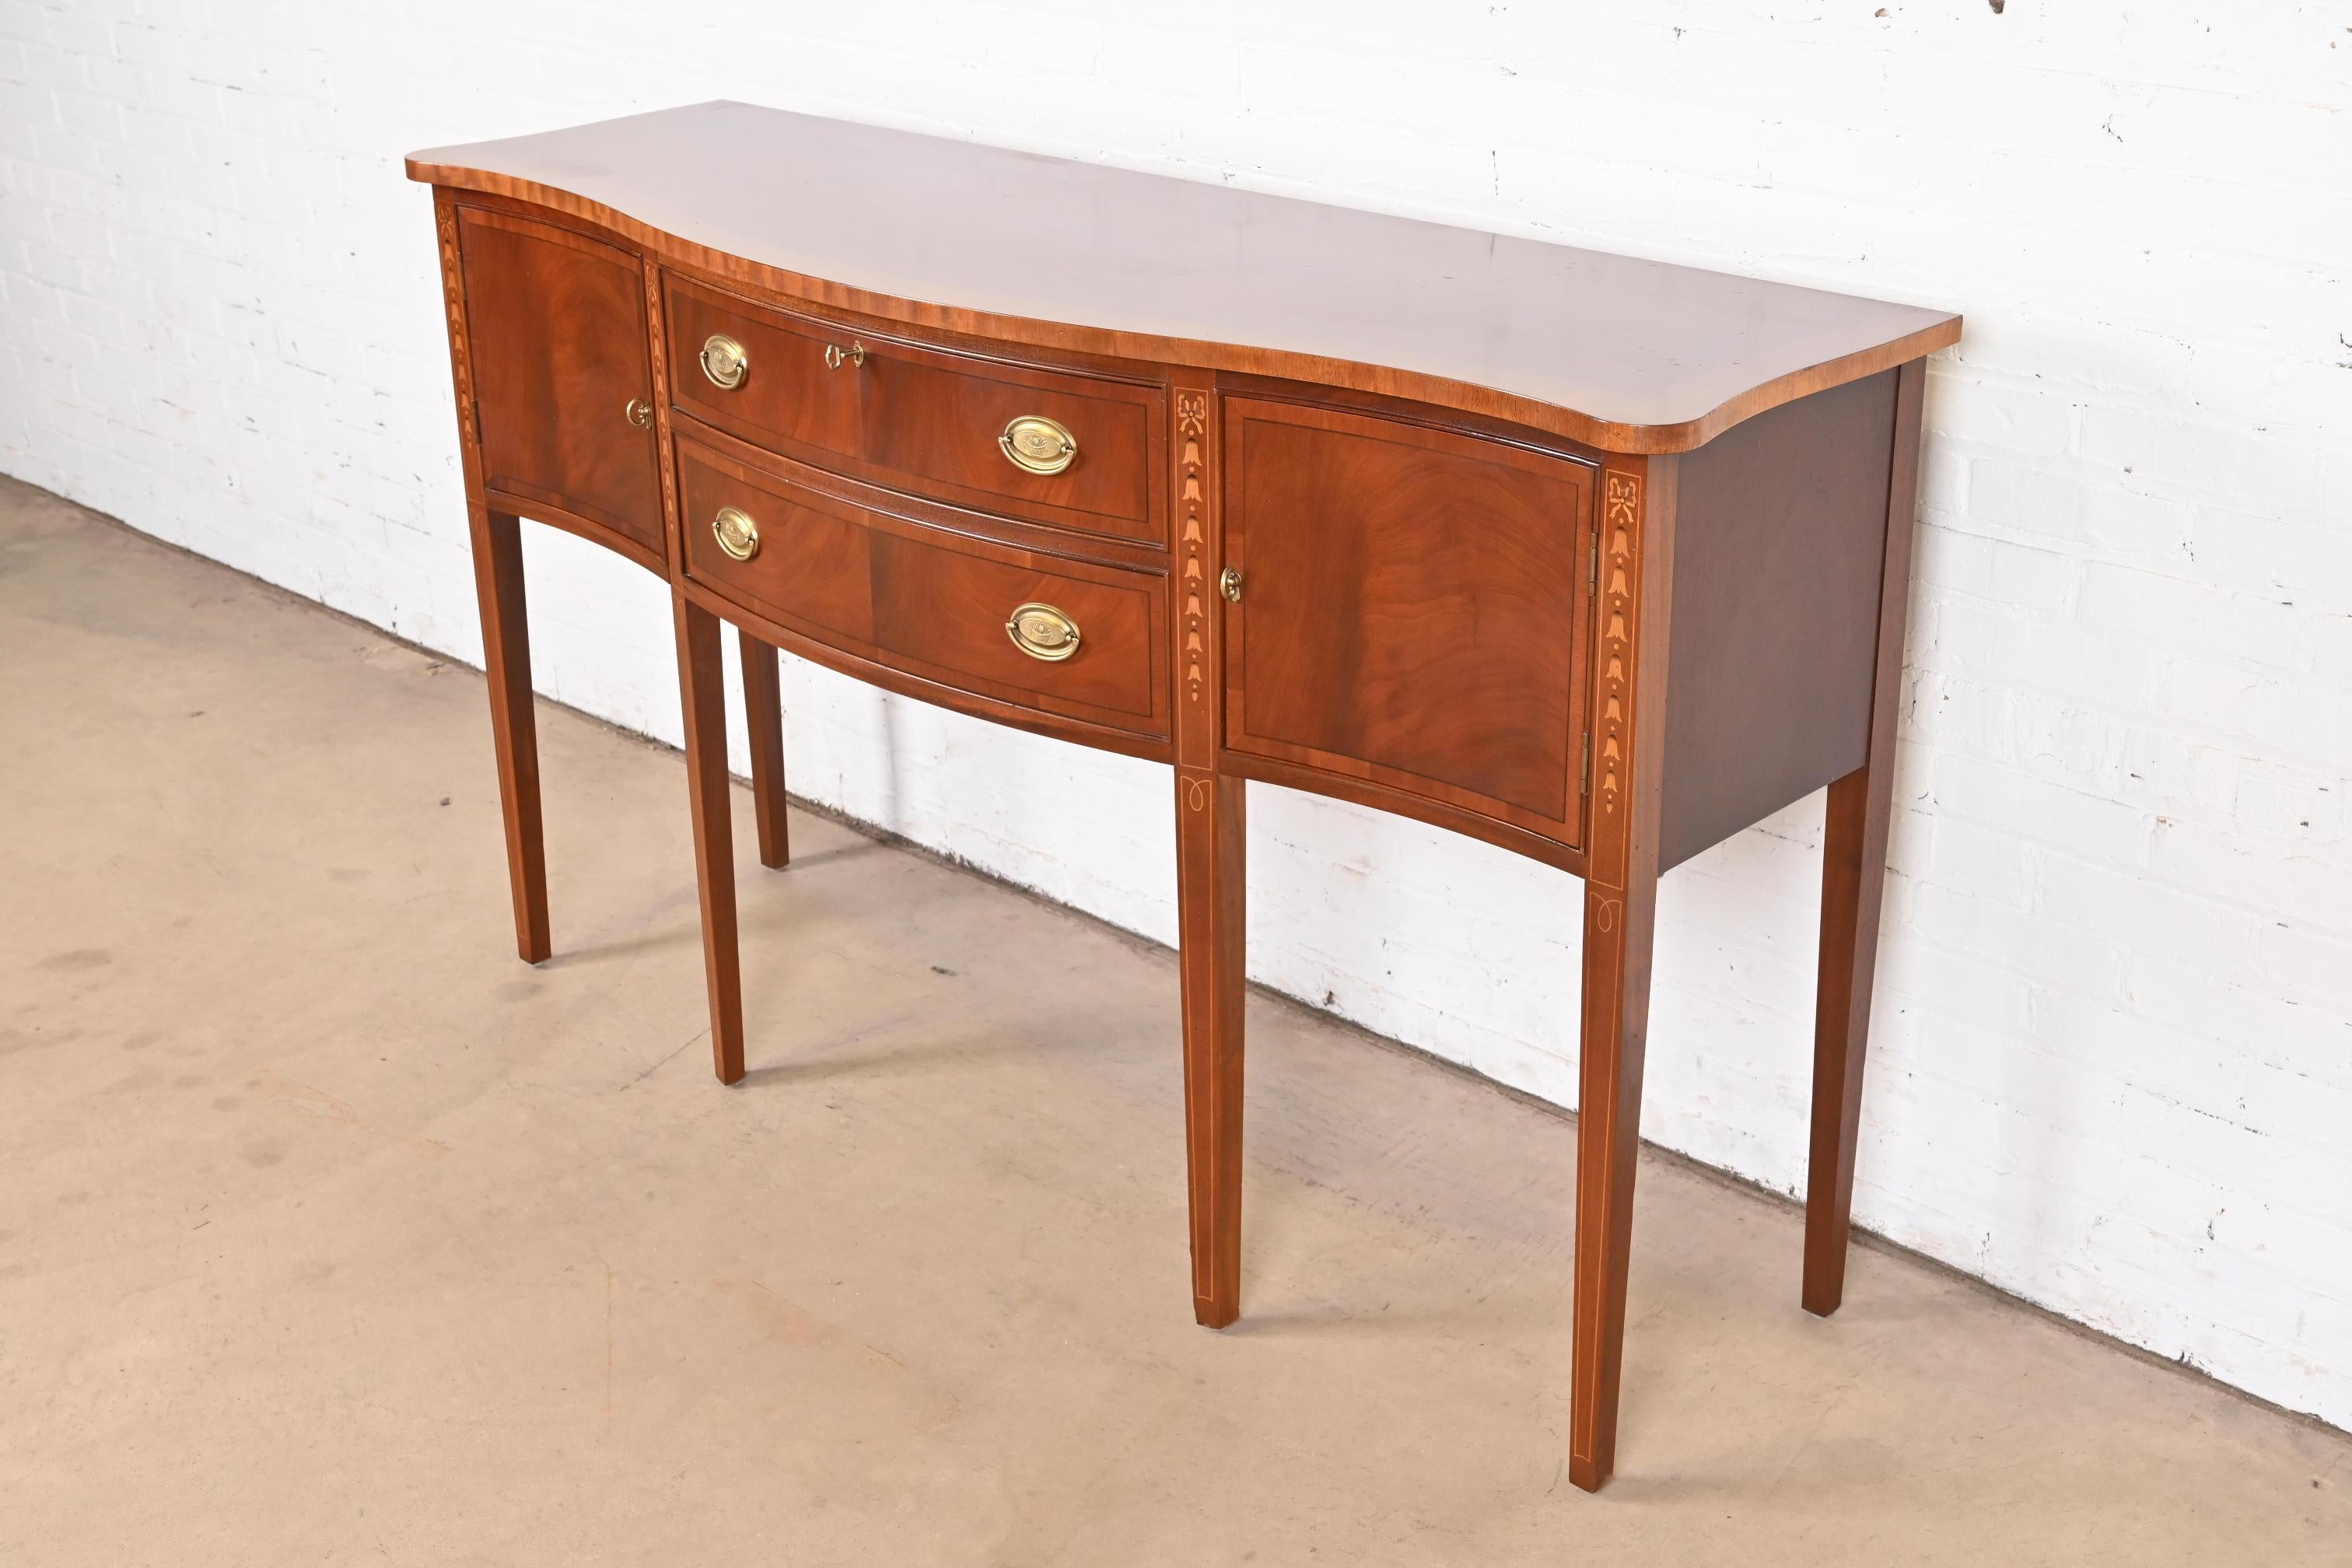 20th Century Hepplewhite Inlaid Mahogany Serpentine Front Sideboard Buffet or Credenza For Sale